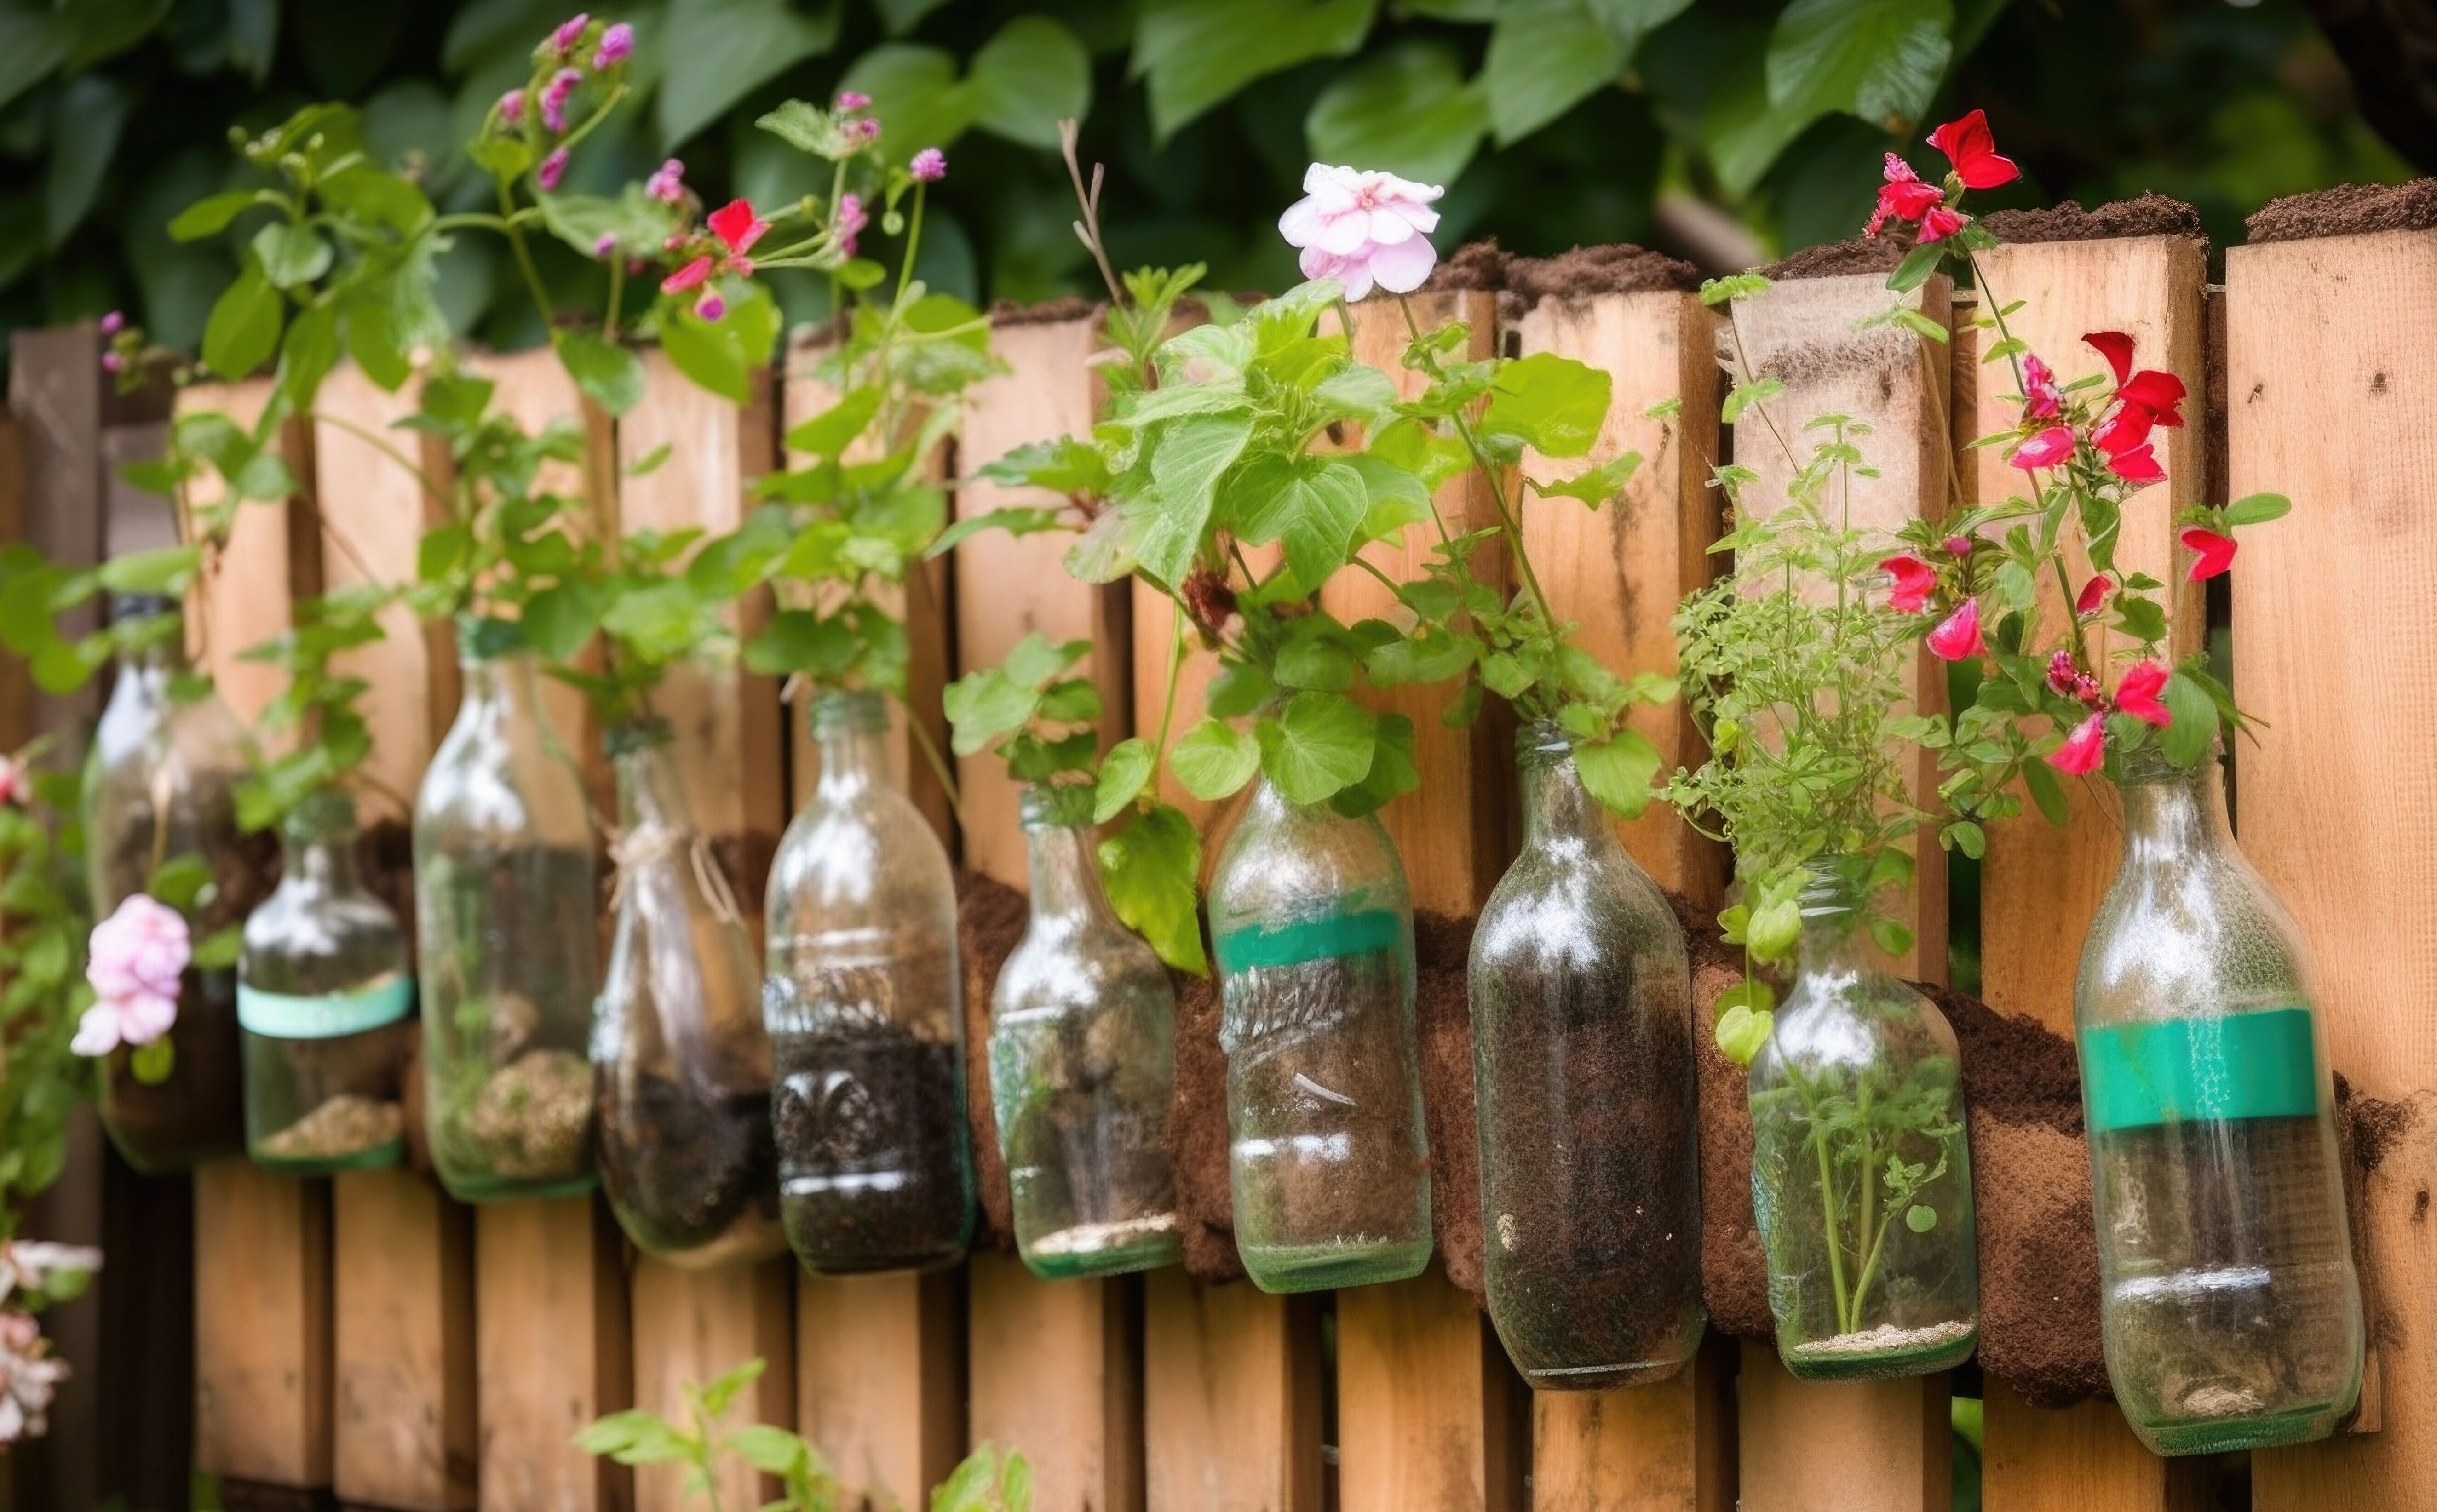 creative diy garden project with recycled materials, such as old bottles and cans